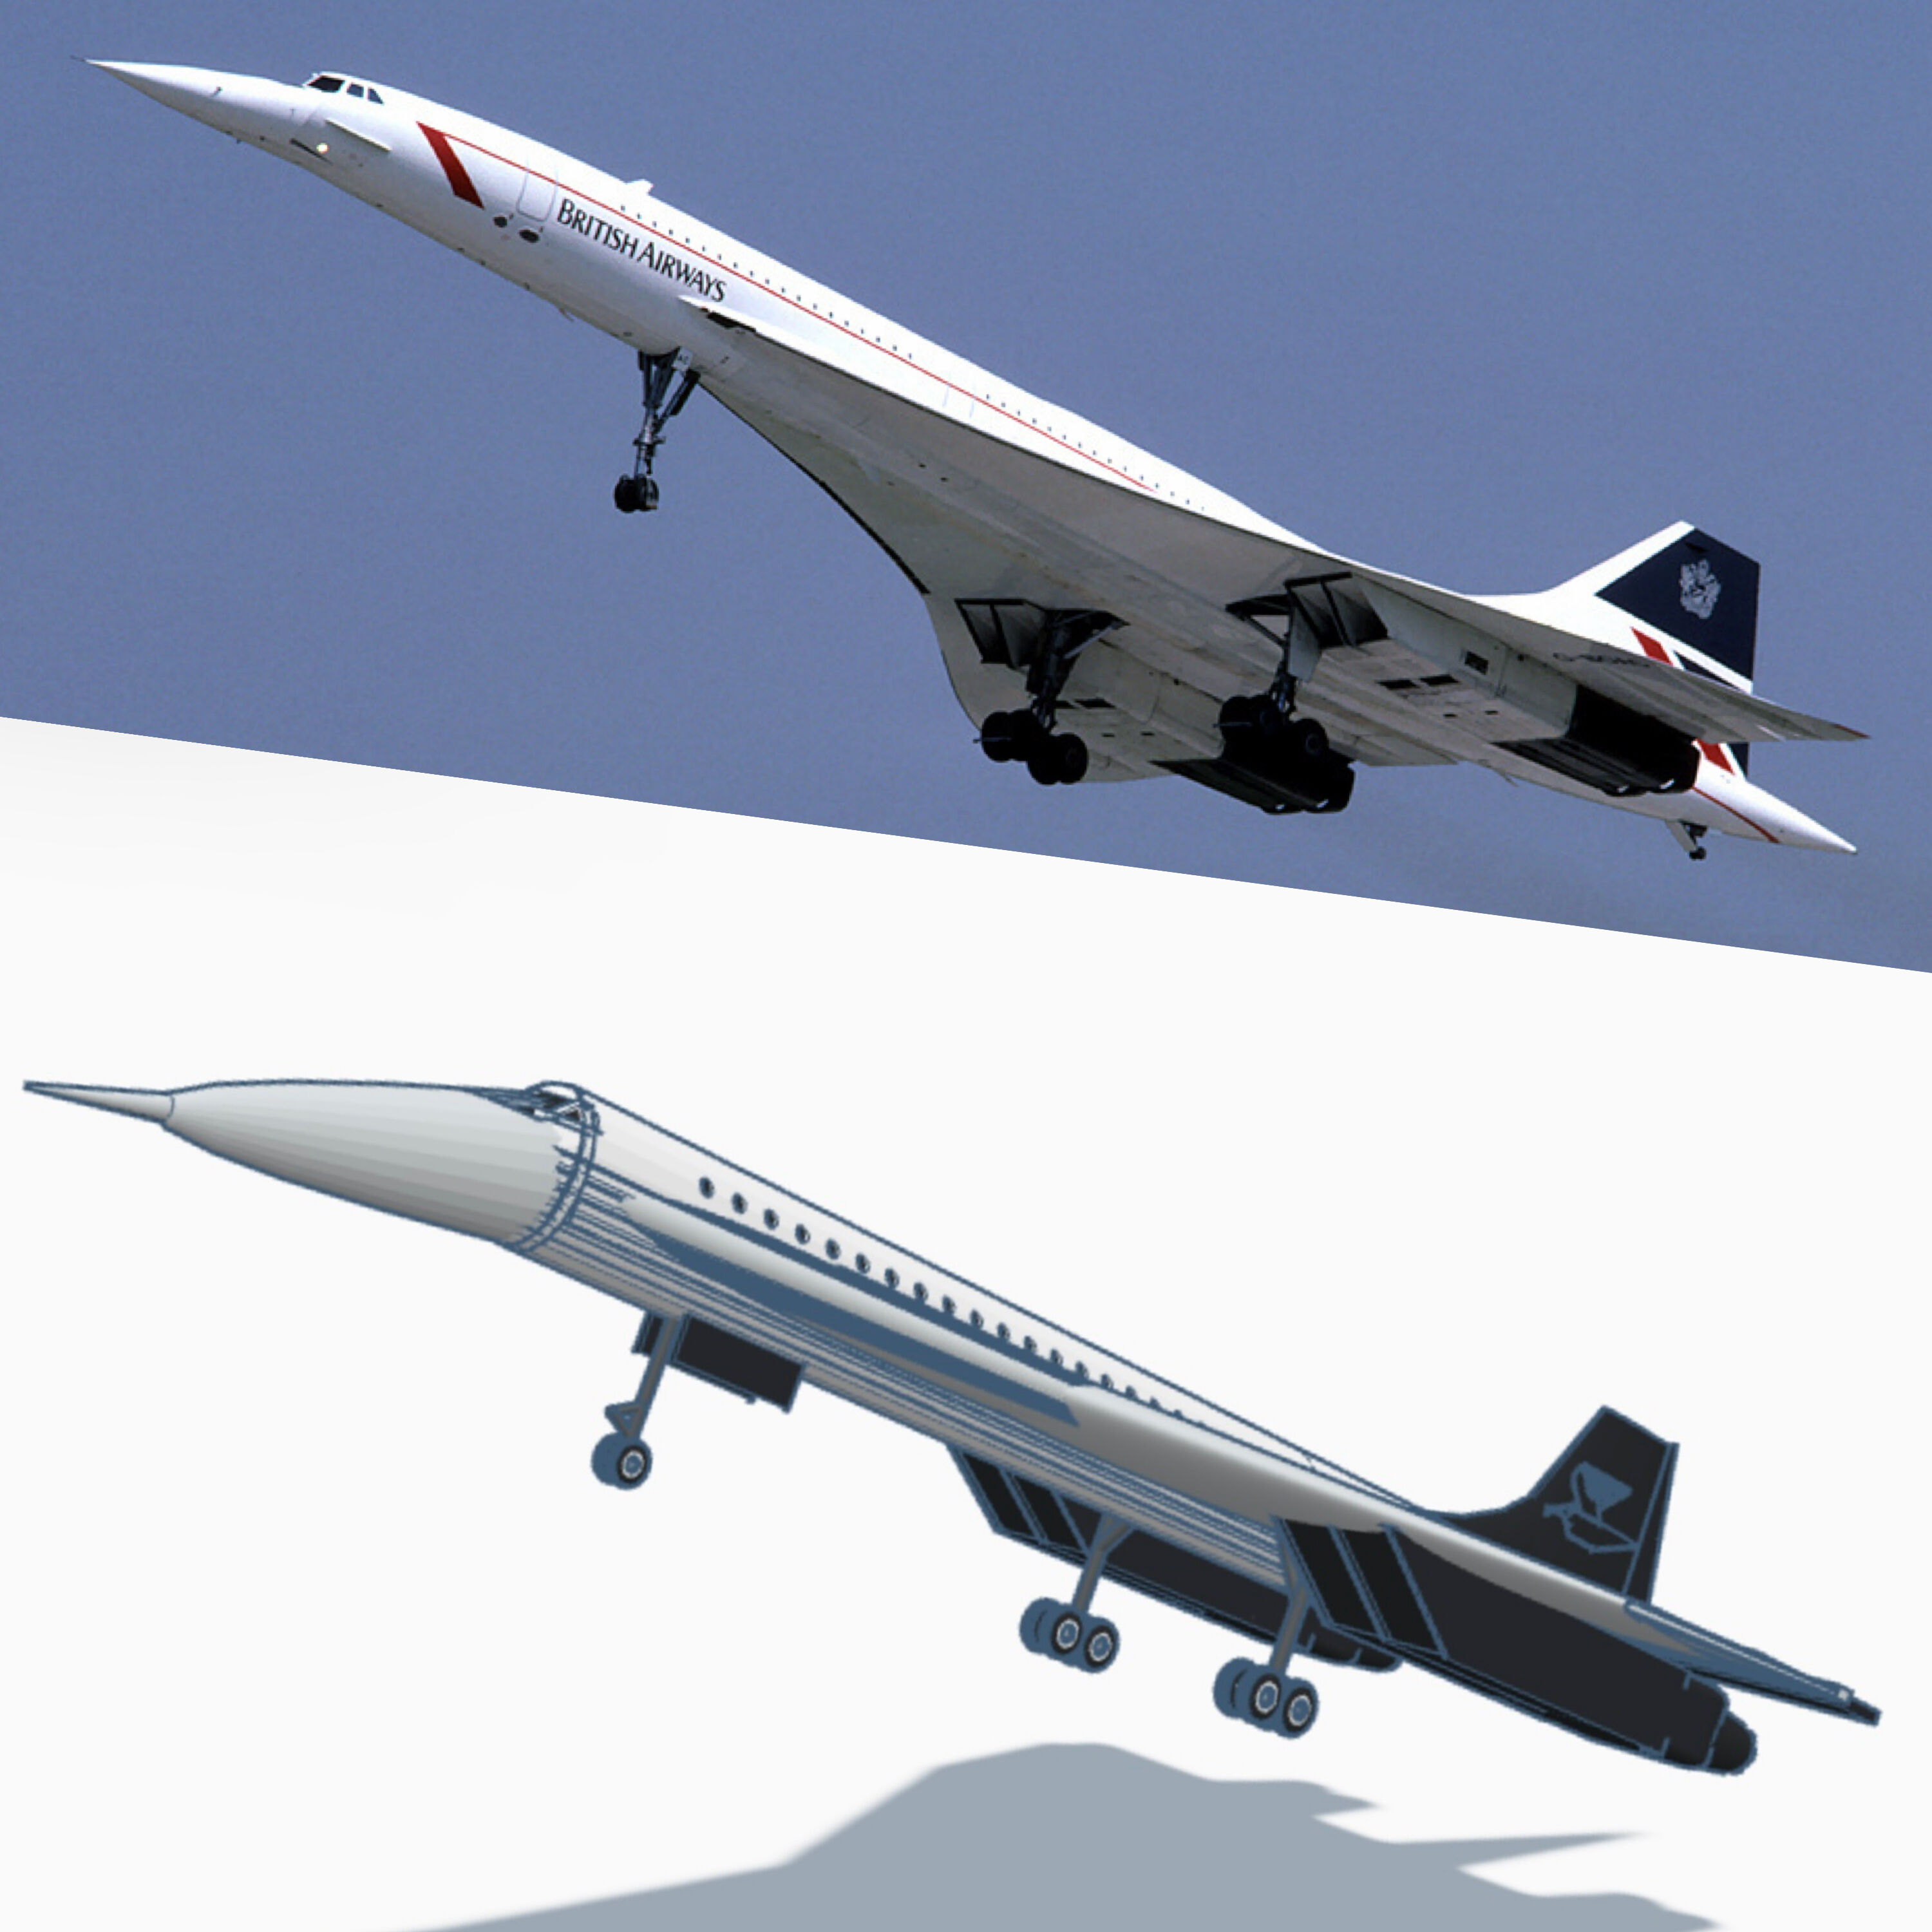 Concorde *Supersonic Airliner*